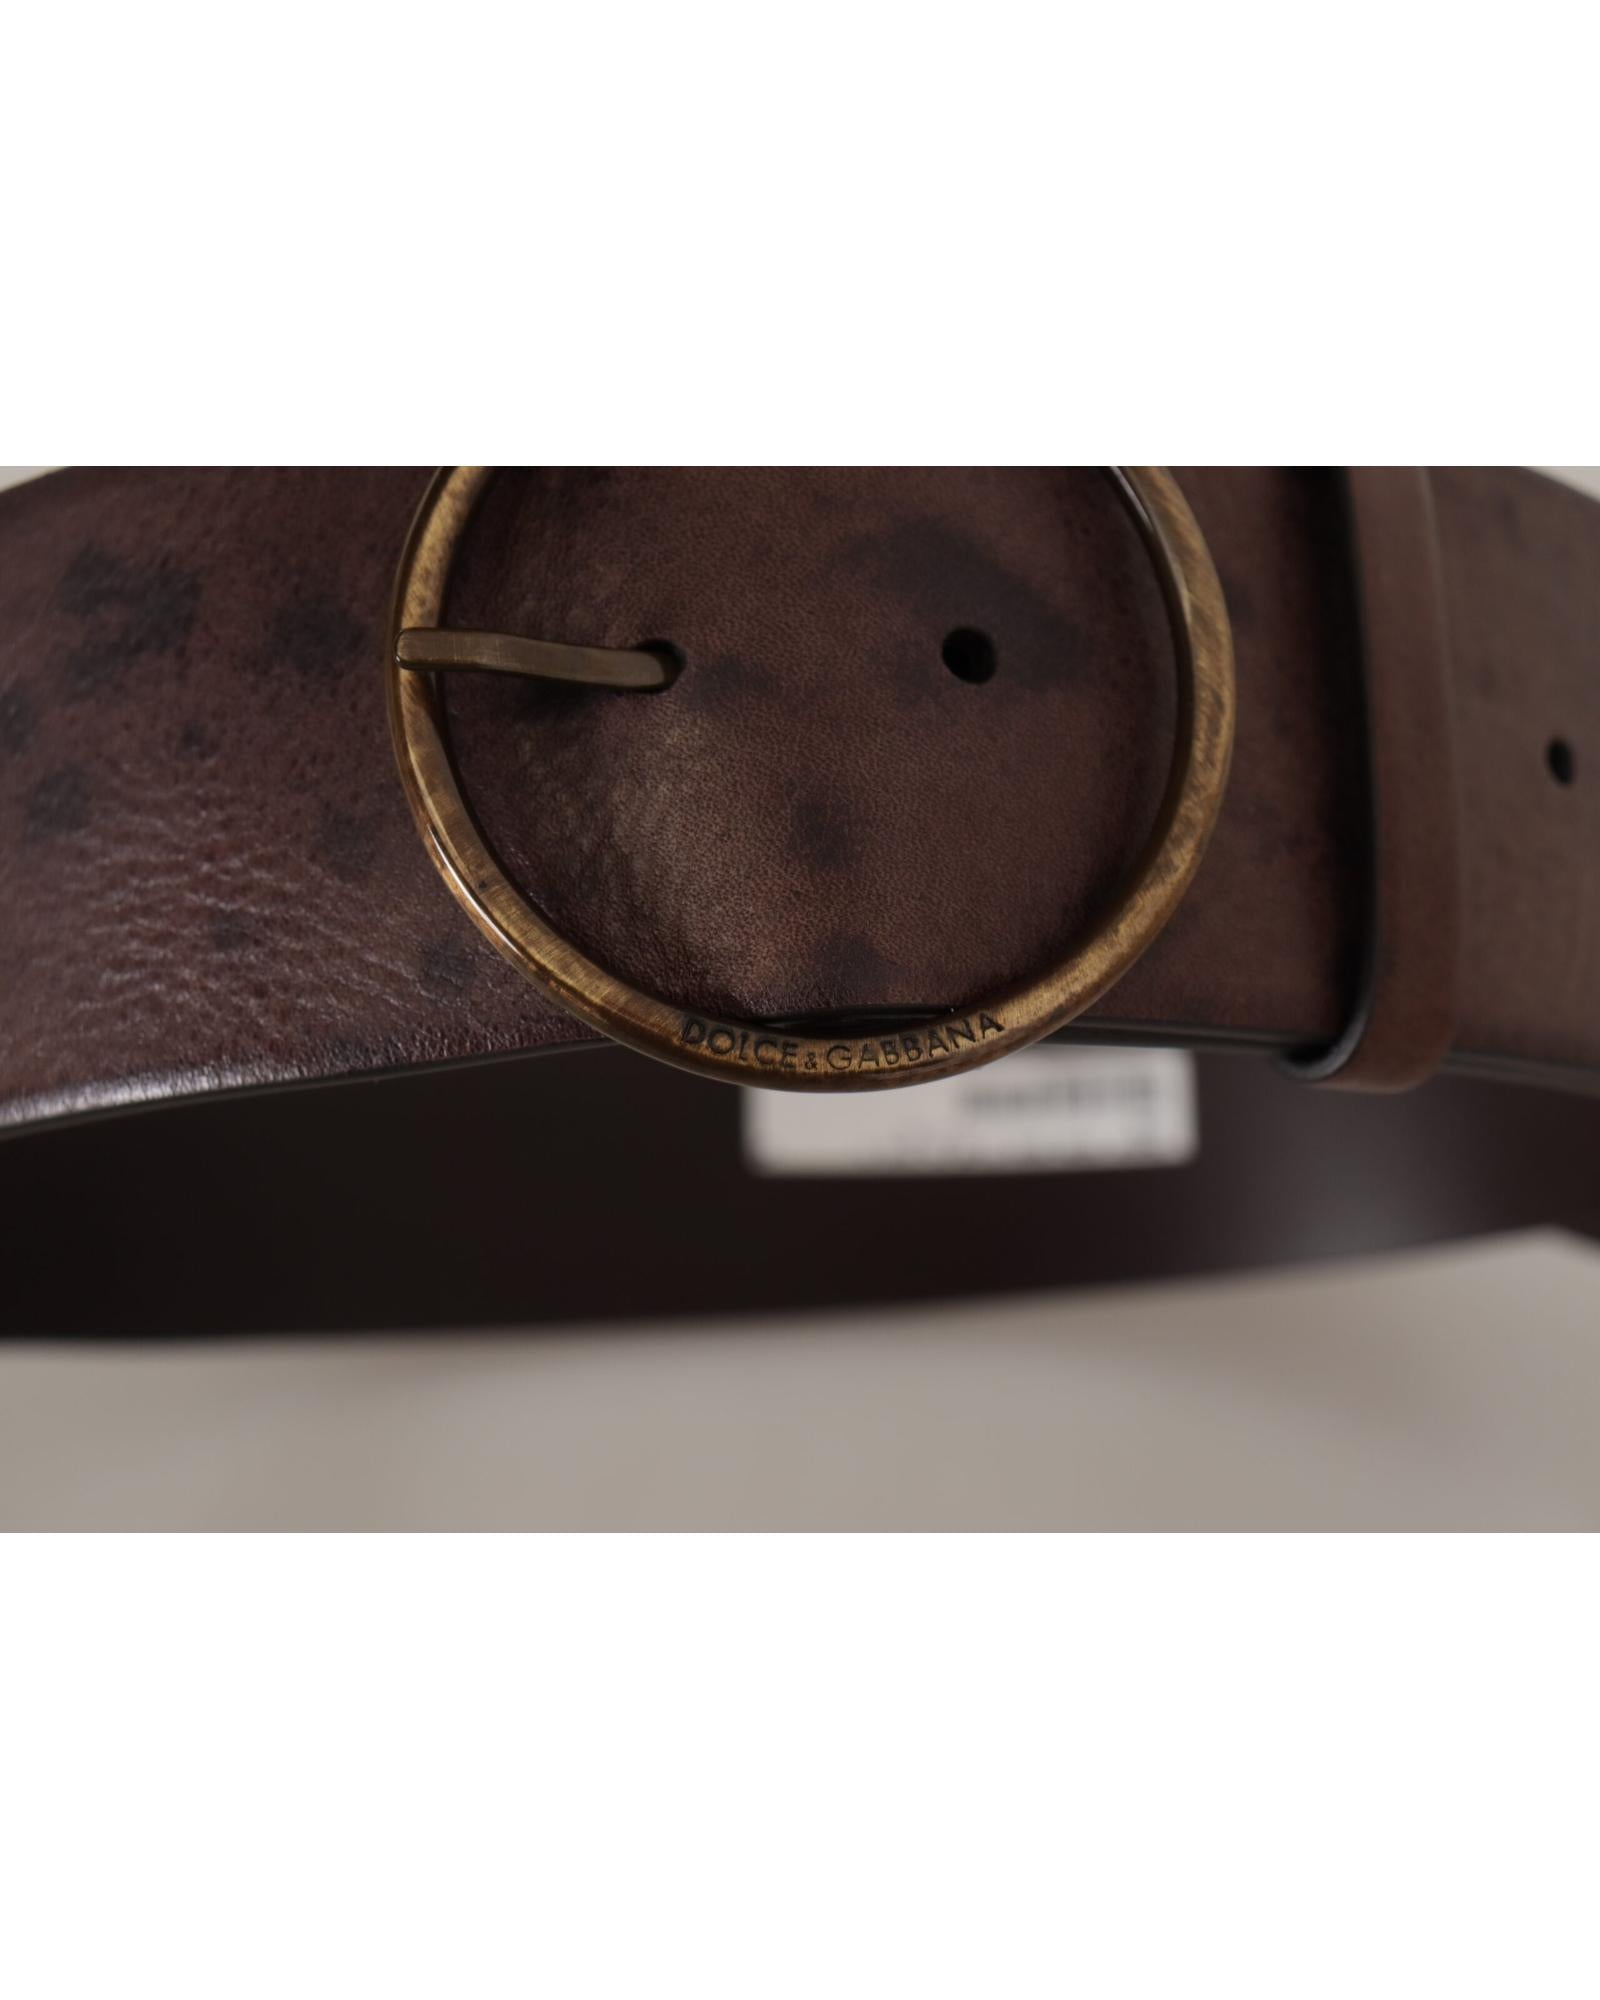 Authentic Dolce & Gabbana Leather Belt with Engraved Logo Buckle 90 cm Women